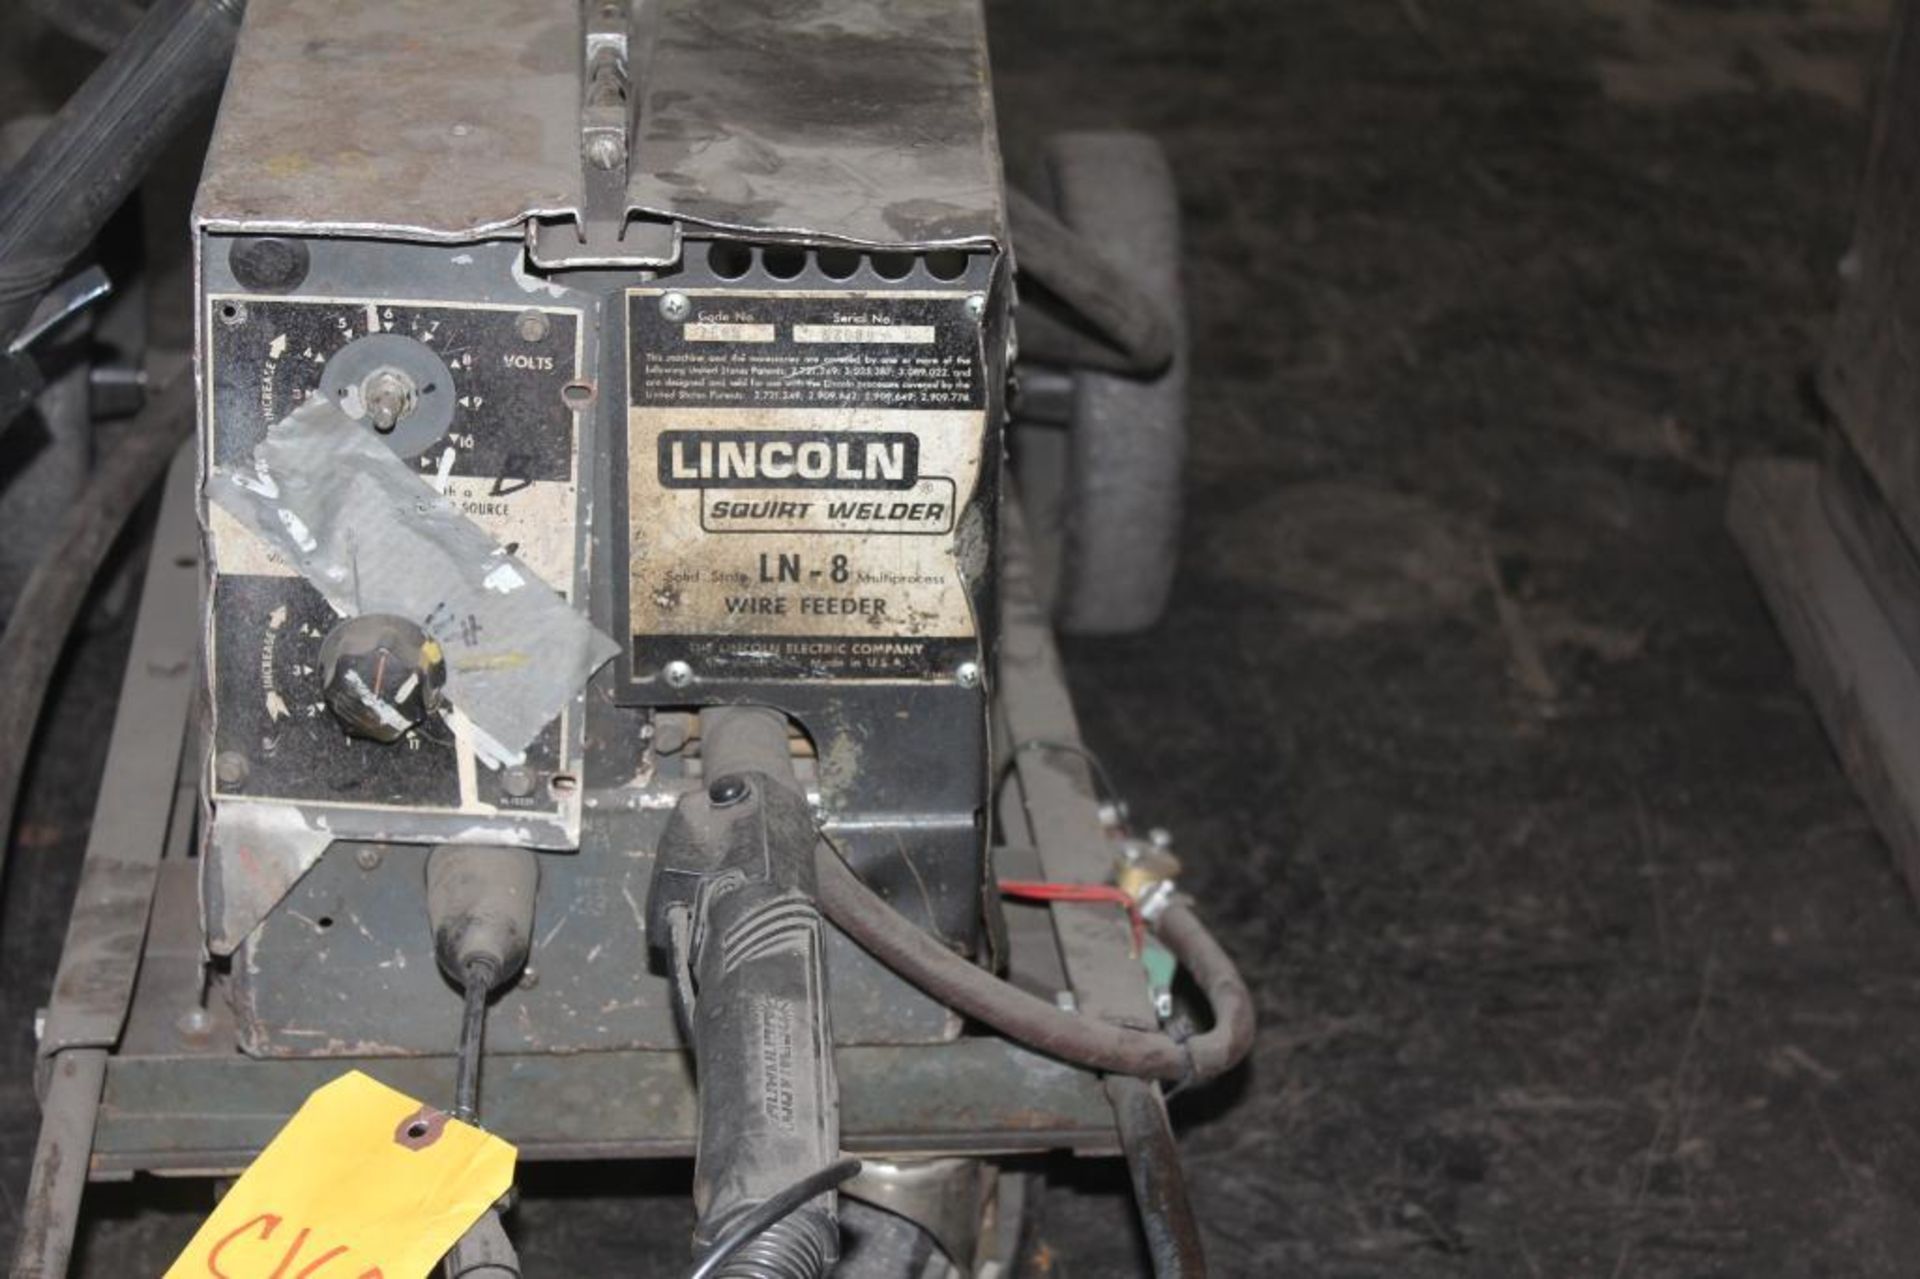 LINCOLN ELECTRIC IDEALARC DC-600 WELDER SN.AC658235 230-460V WITH LN-8 WIRE FEED SN.57089 115V - Image 5 of 10